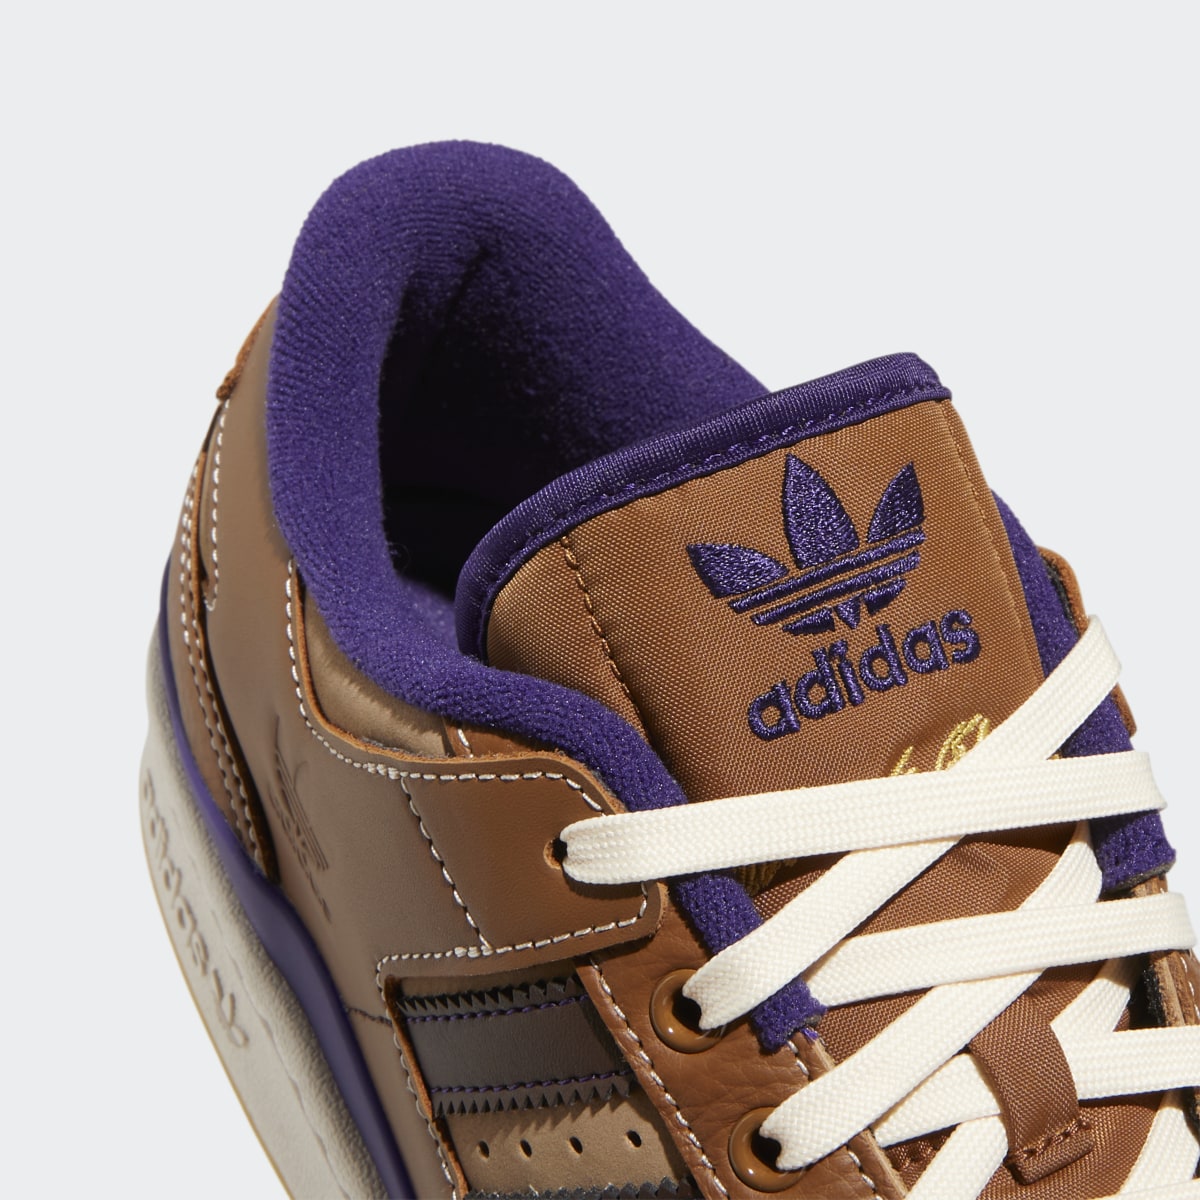 Adidas Heitor Forum 84 Low ADV Shoes. 11